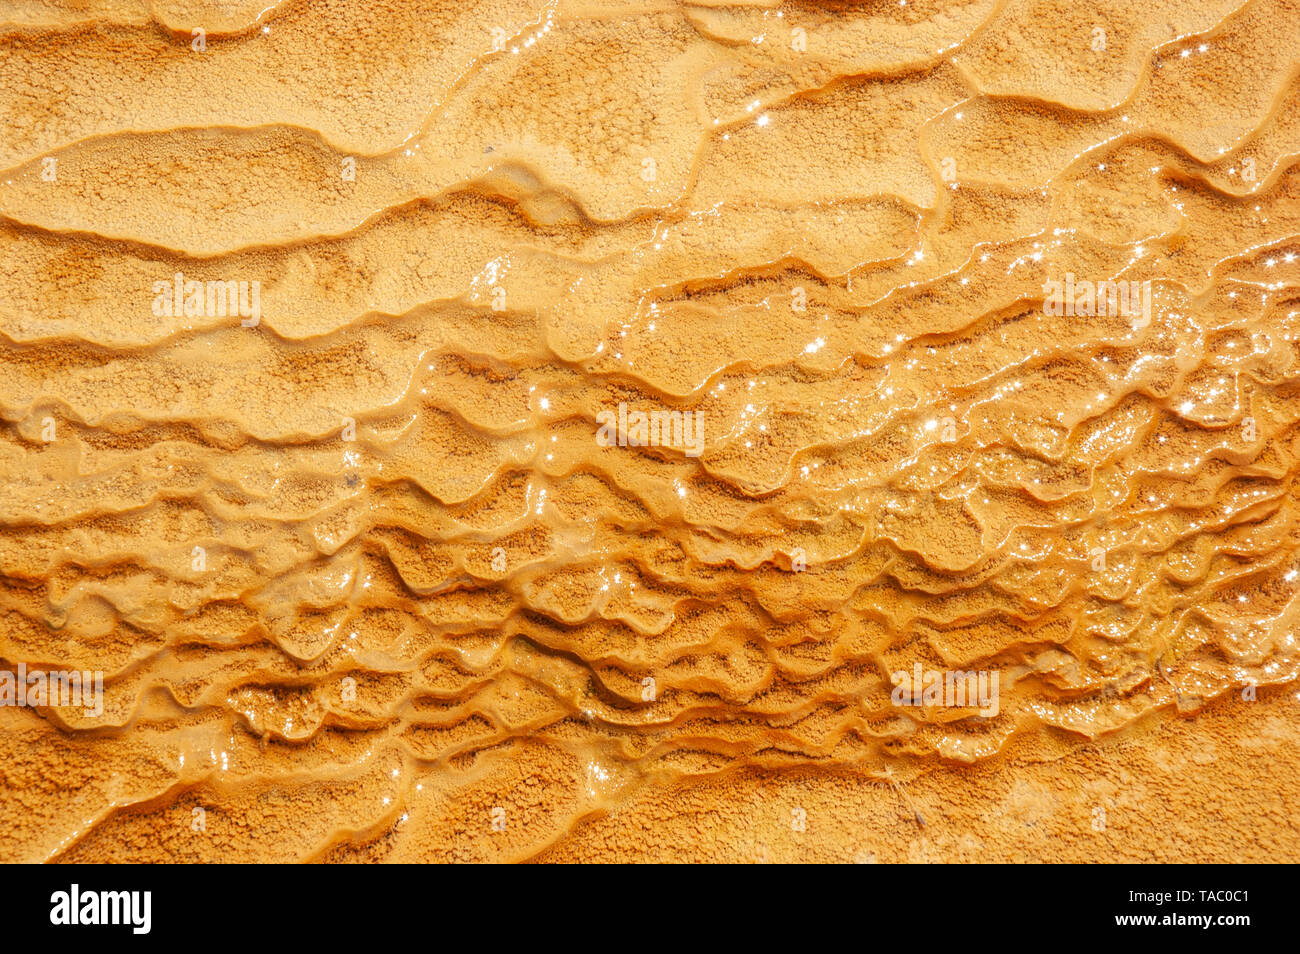 Layers of mineralization at a hot spring. Stock Photo